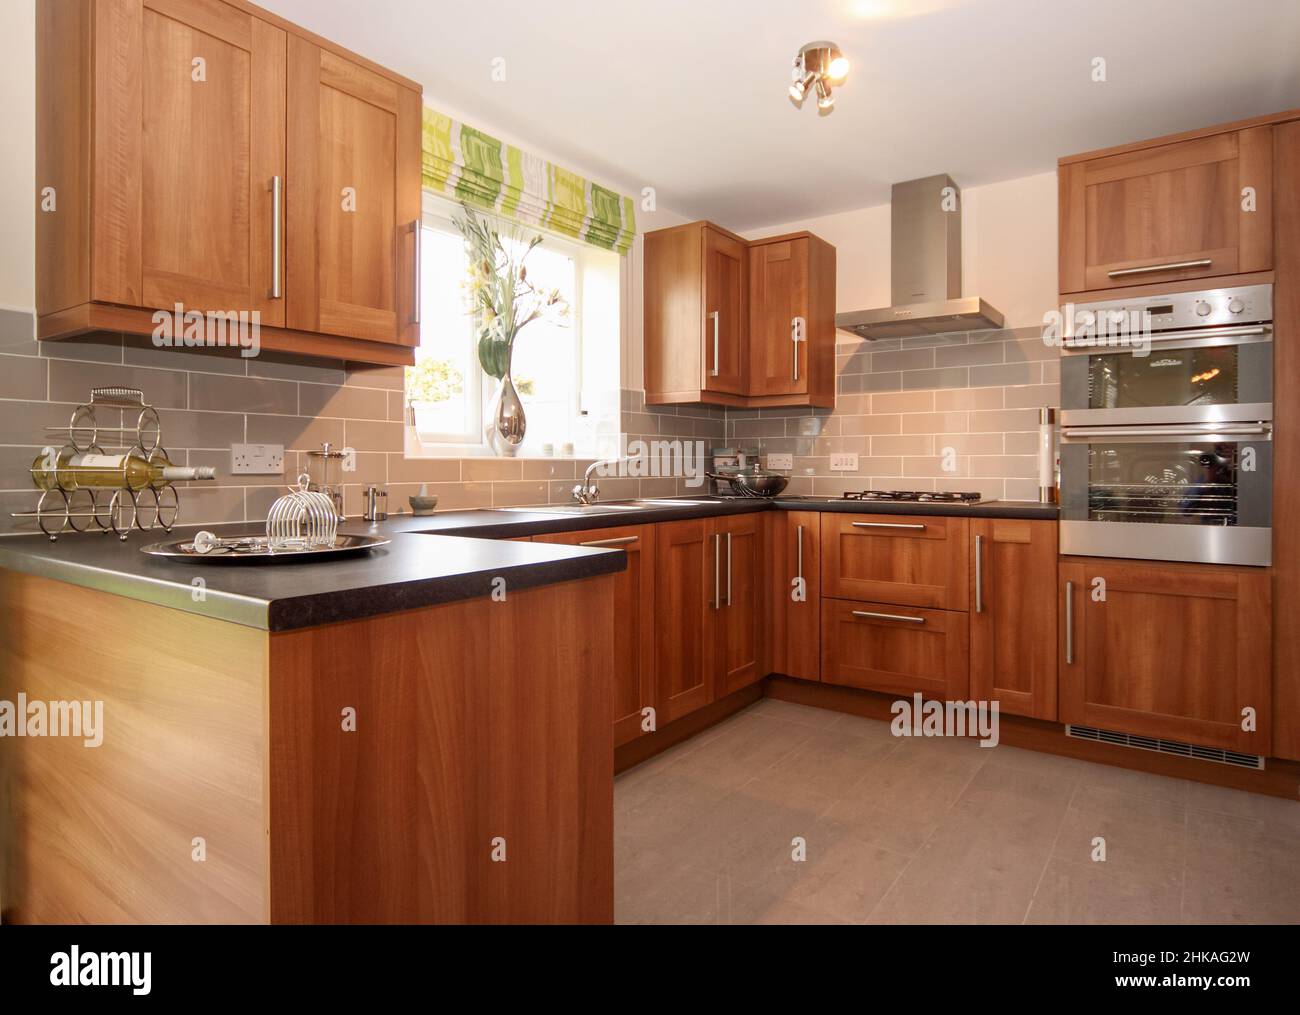 Kitchen with wood finish cabinets fittings, stainless steel double oven, tiled floor, cooker hood. Stock Photo